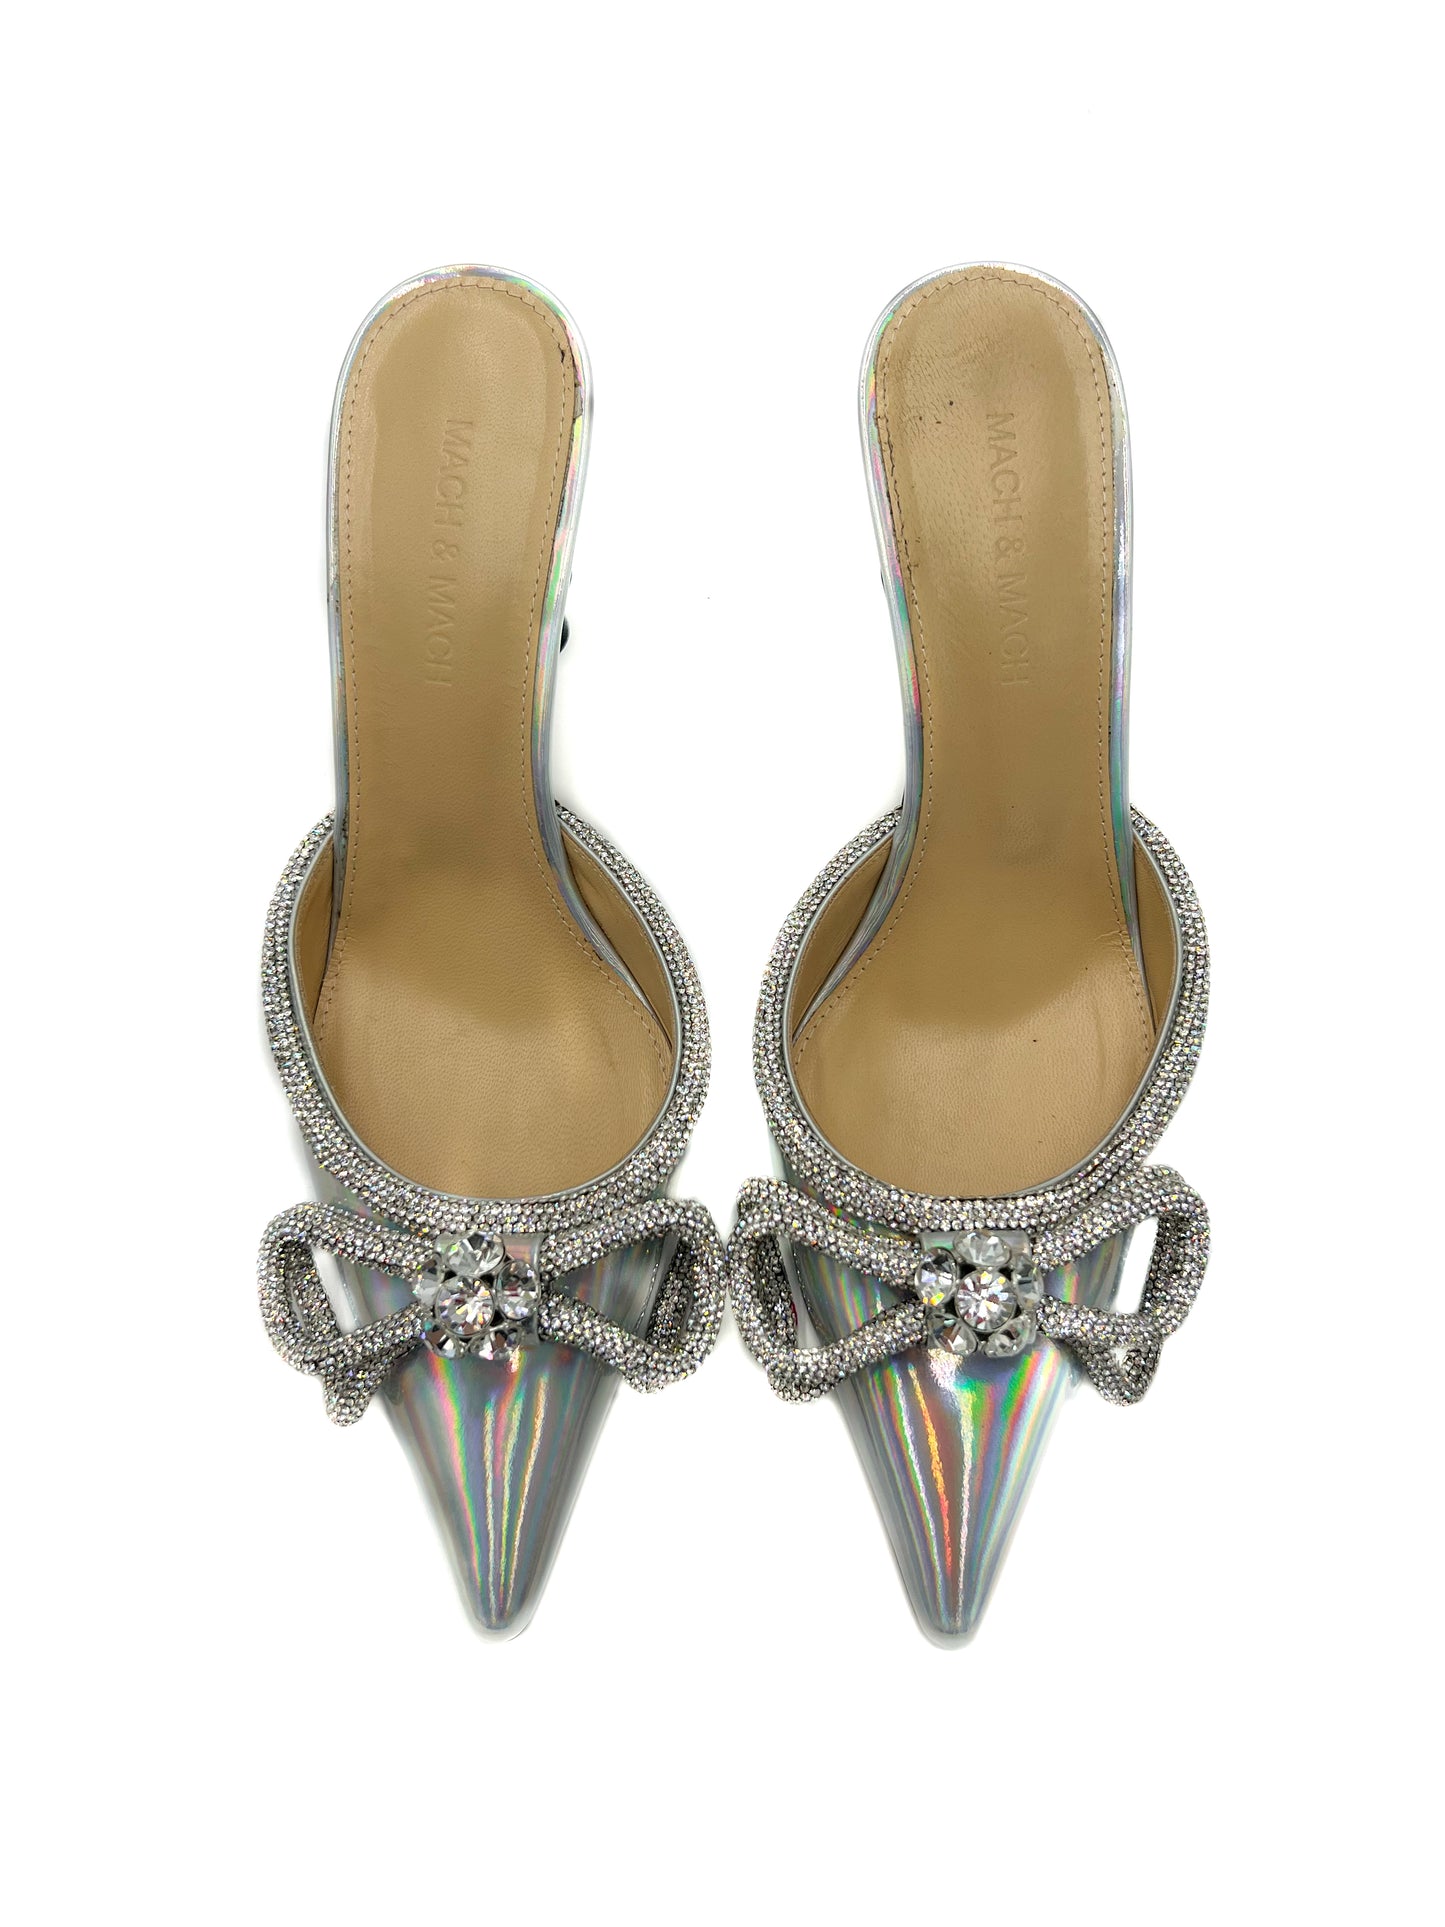 MACH & MACH Double Bow Crystal-Embellished Mules